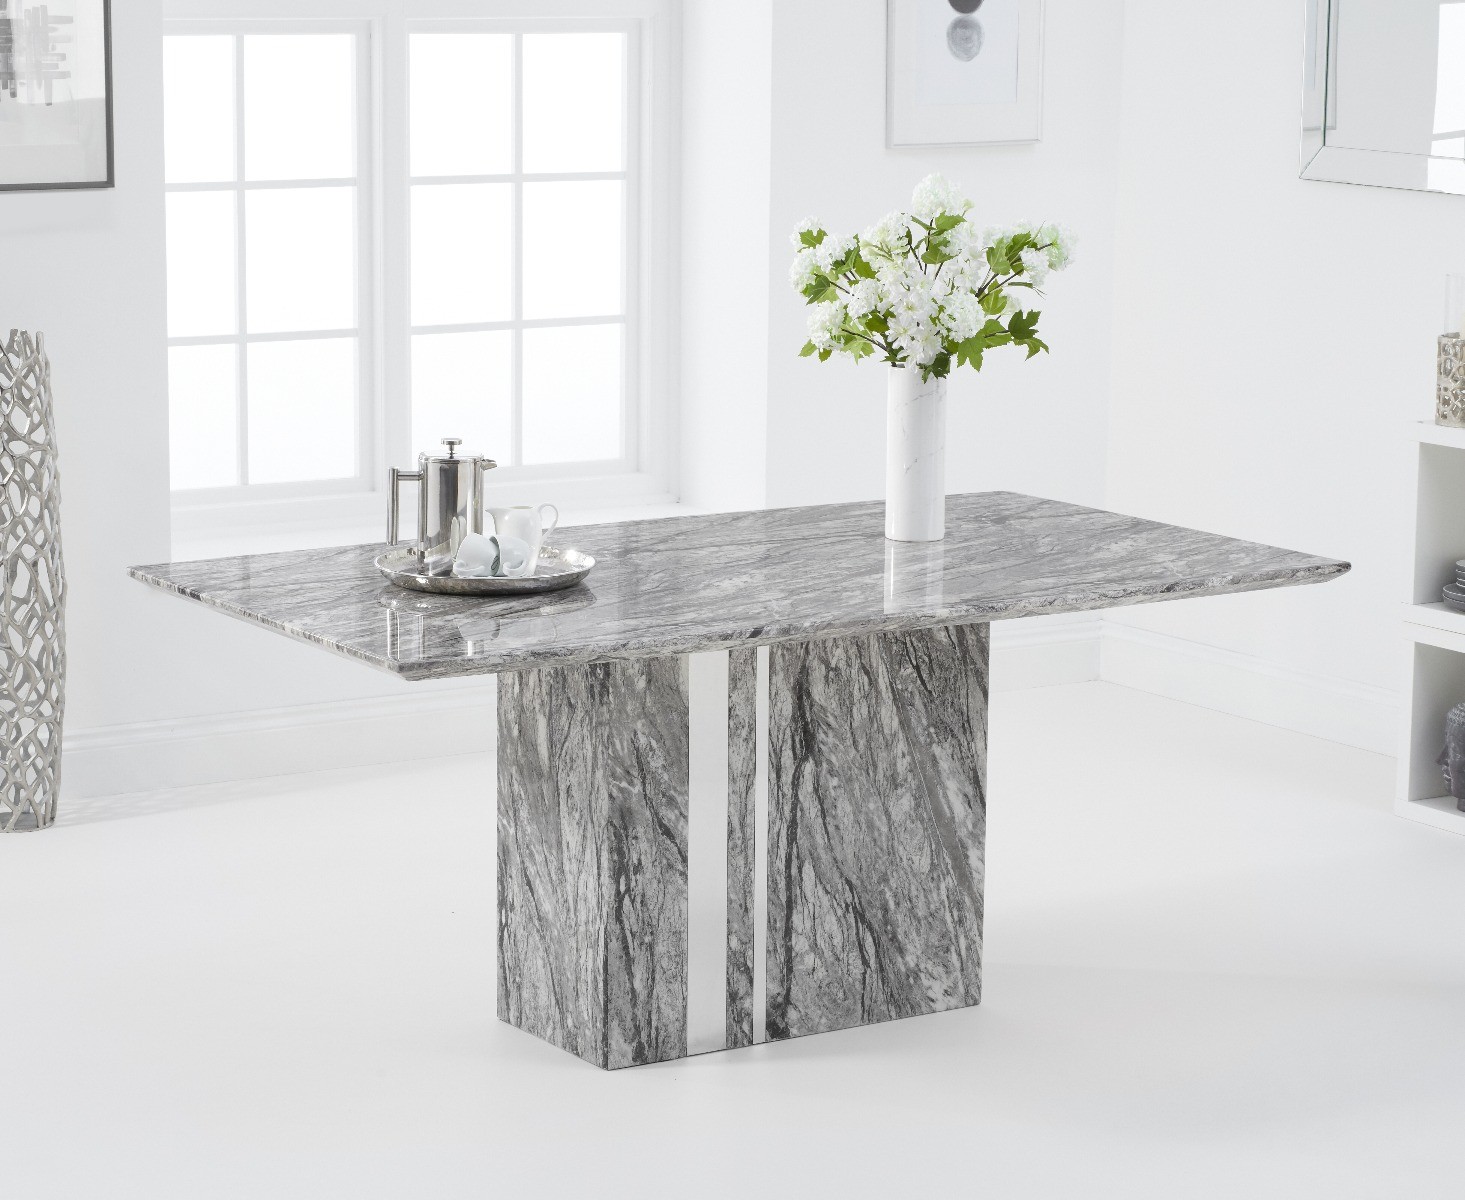 Photo 2 of Alicia 180cm grey marble dining table with 8 grey aldo chairs